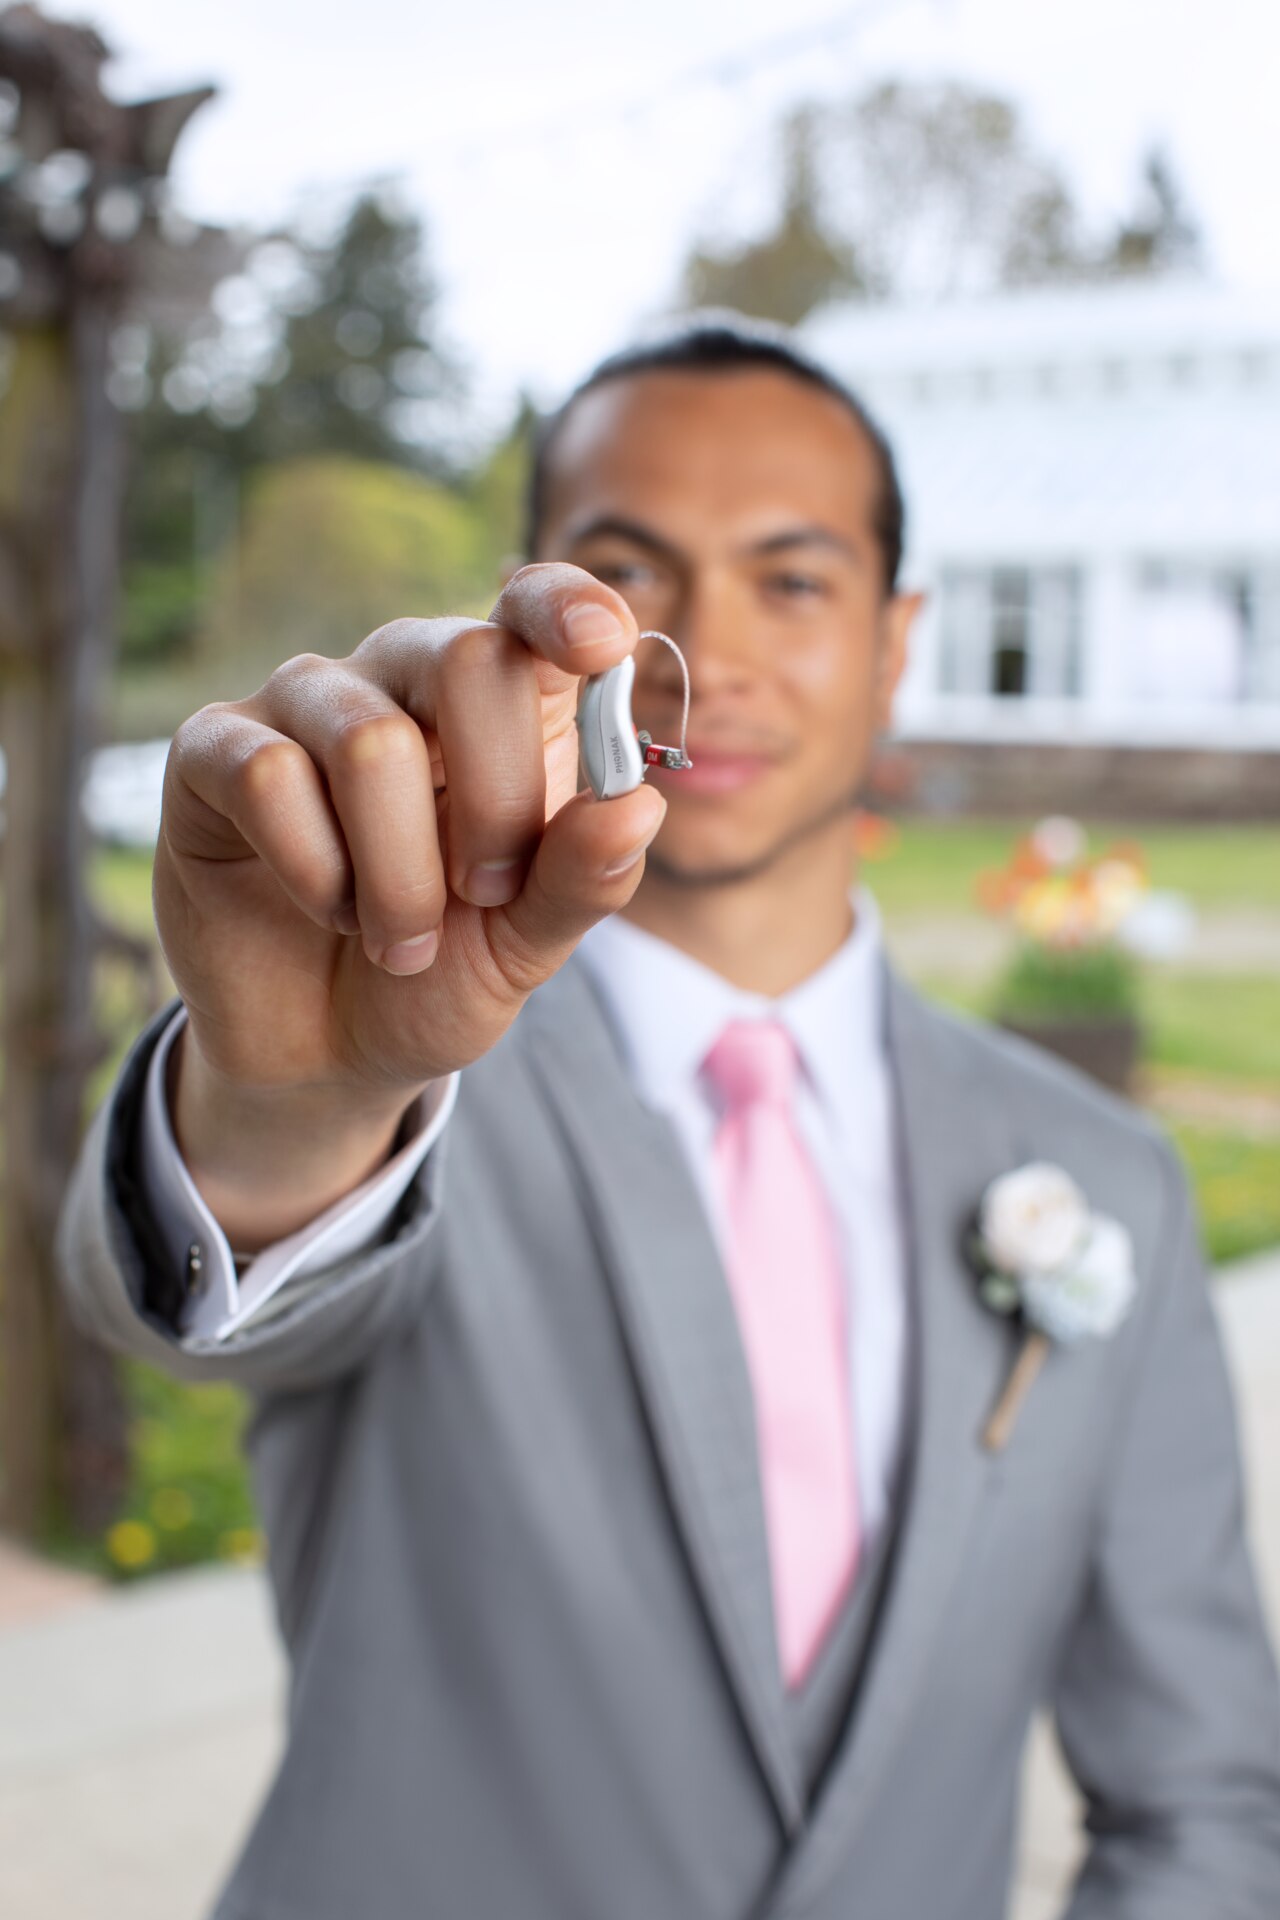 Phonak Audéo L-R hearing aid in a hand of a young male in a wedding suit.